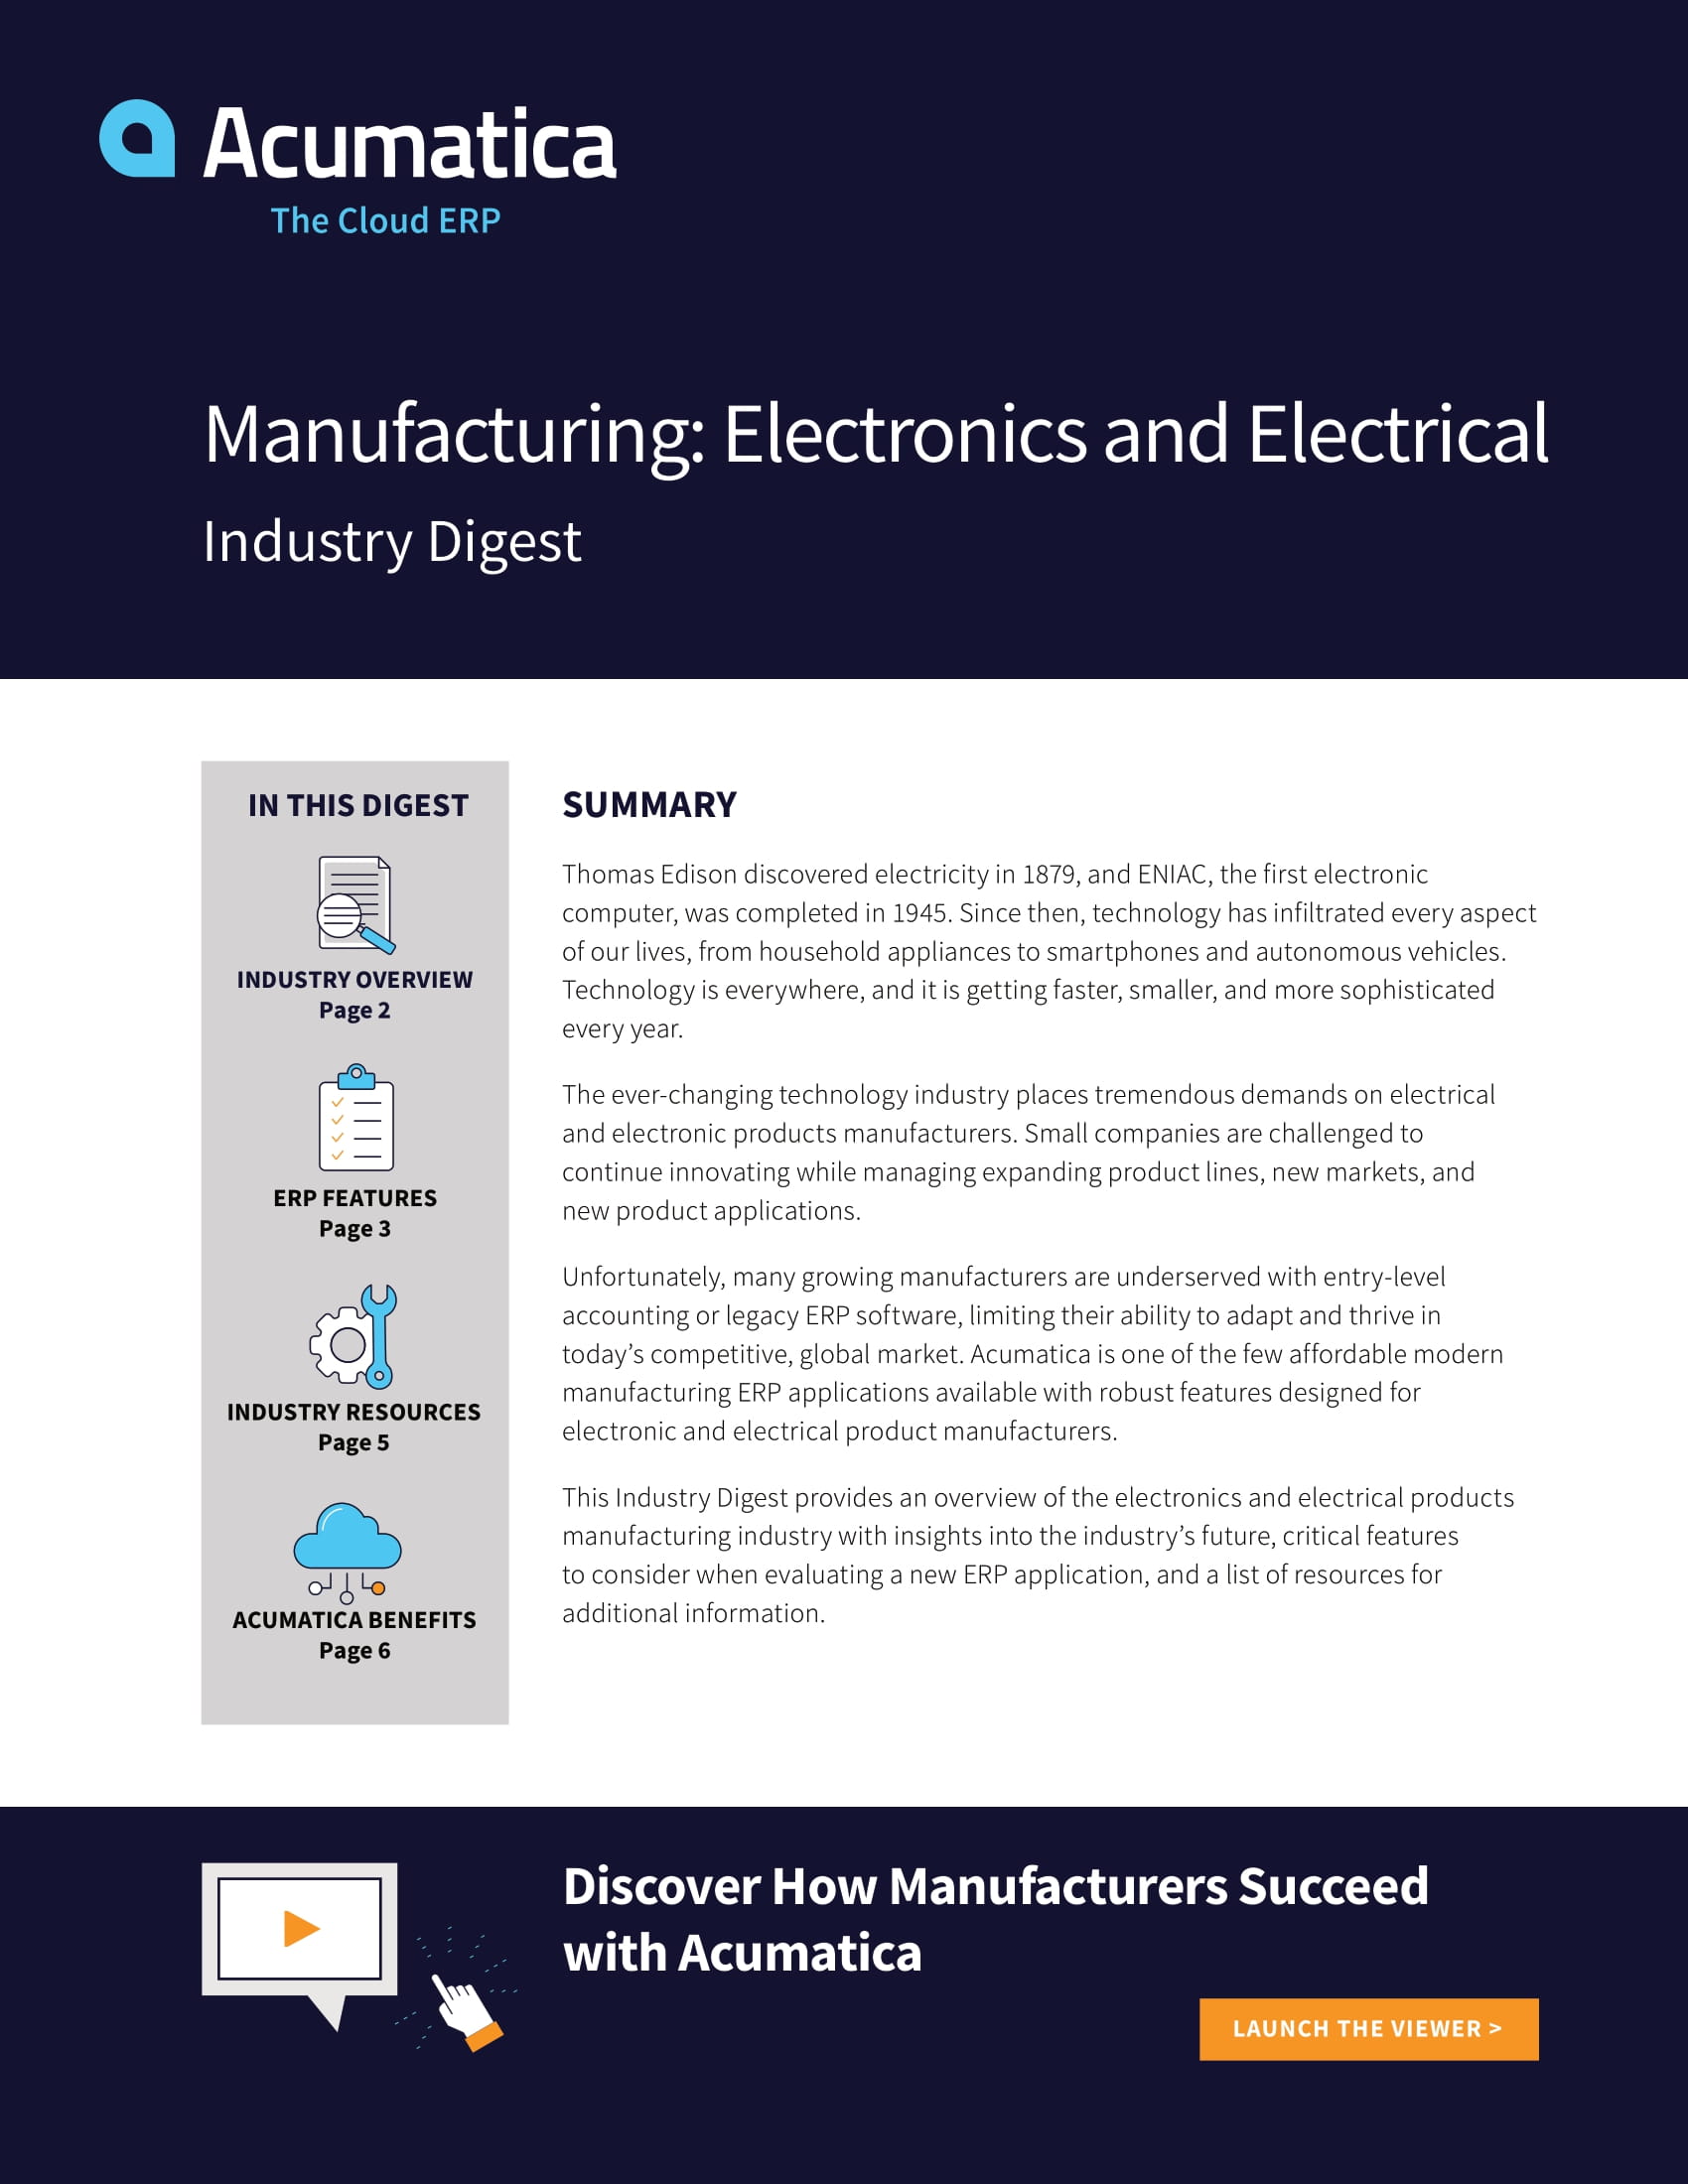 Acumatica Cloud ERP Sparks Success for Electronics and Electric Products Manufacturers 